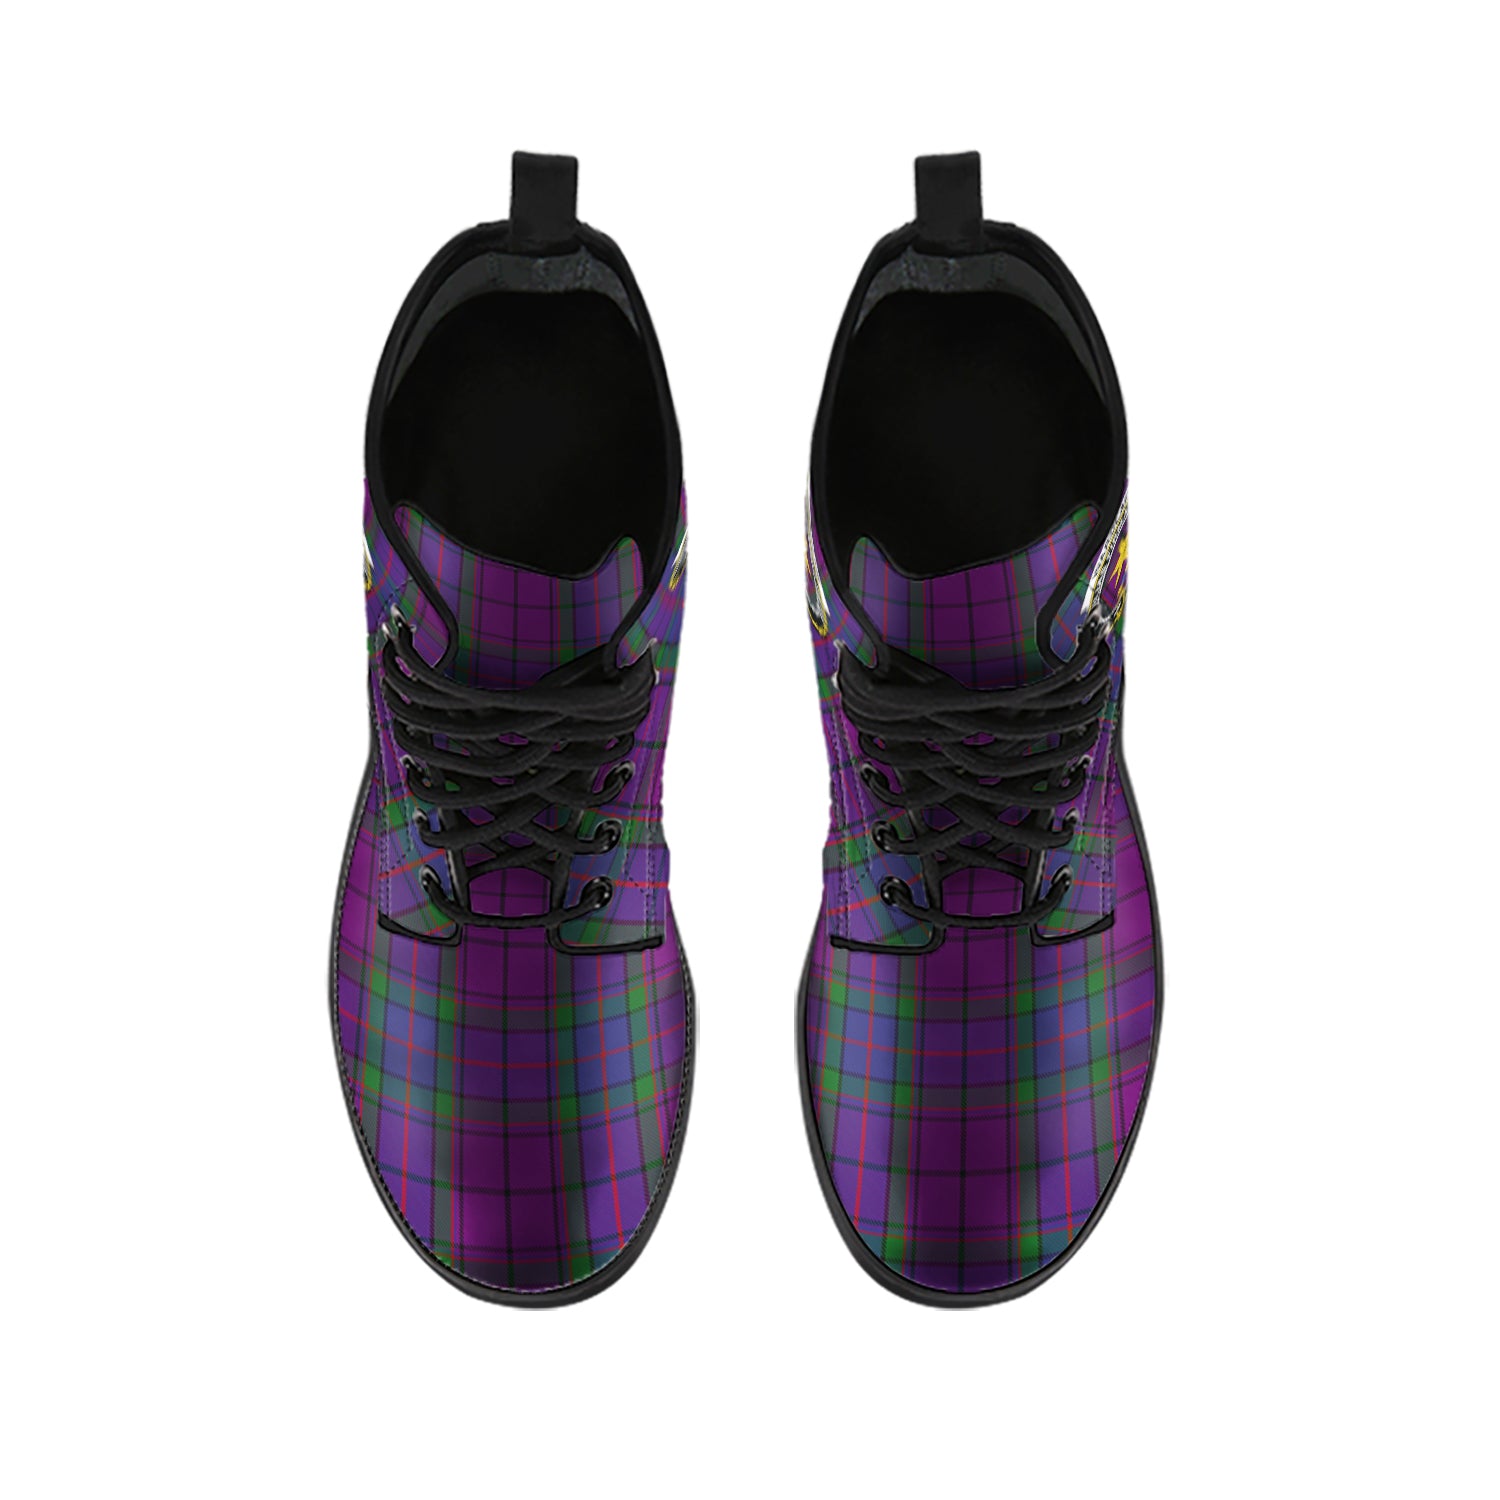 wardlaw-tartan-leather-boots-with-family-crest